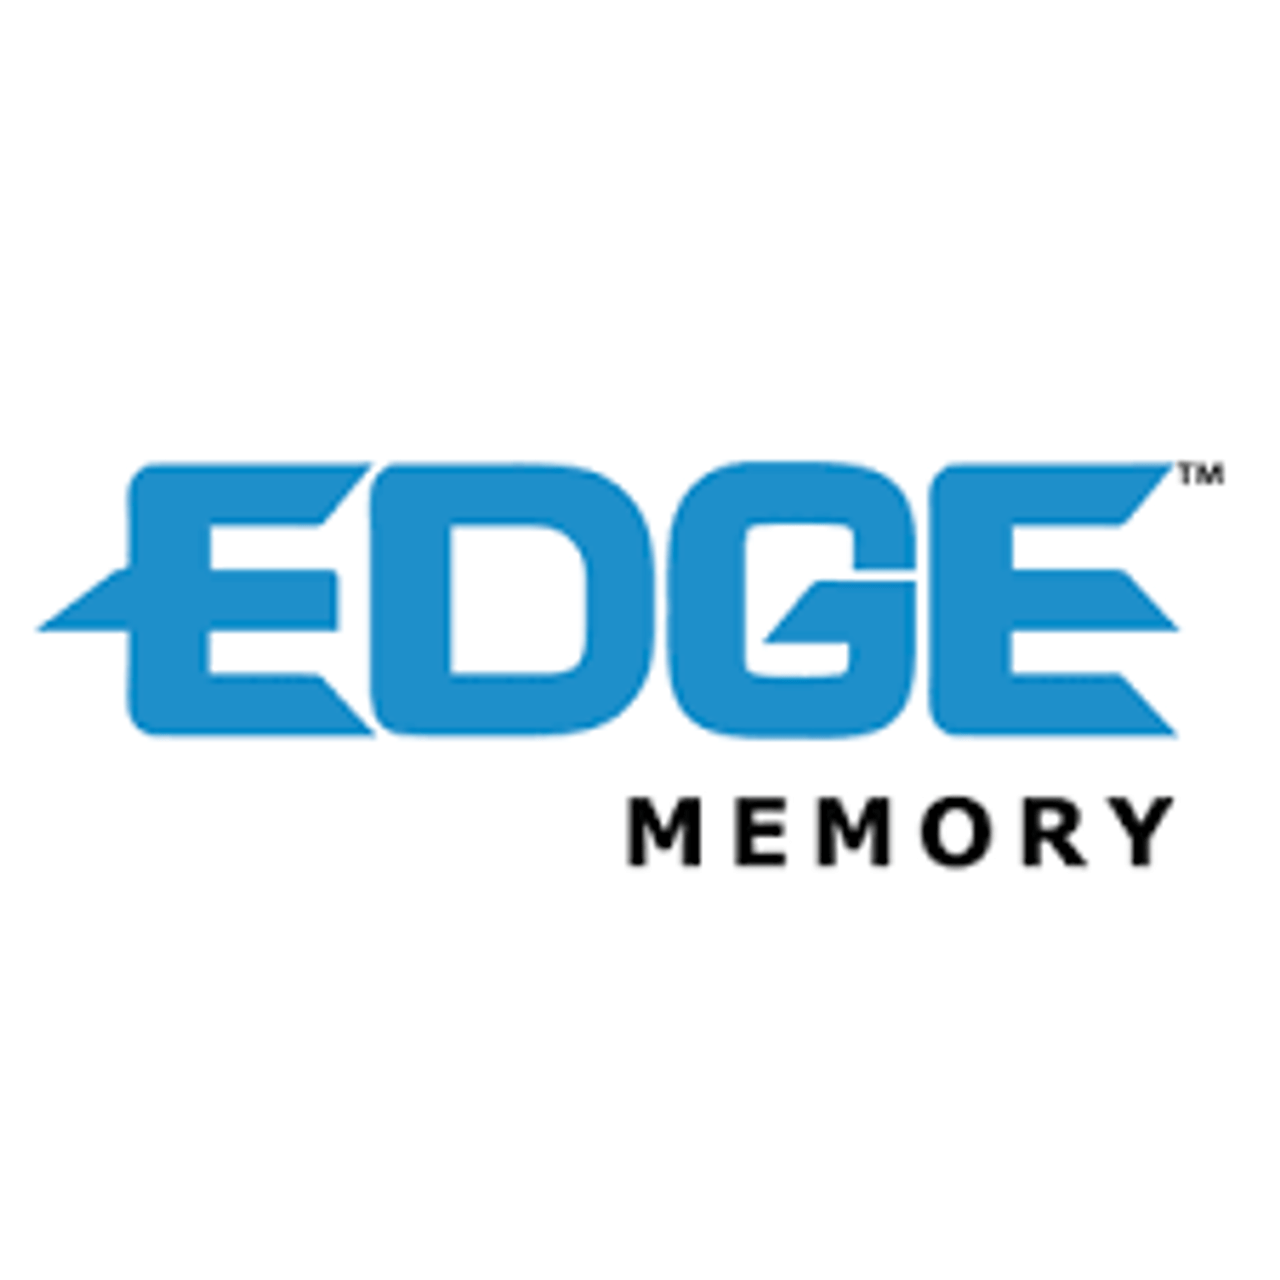 EDGE Install 3.5in SAS or SATA drives into your HP server quickly and easily. EDGE OEM quality server caddies make installation a breeze.  Each caddy is built with only premium components.